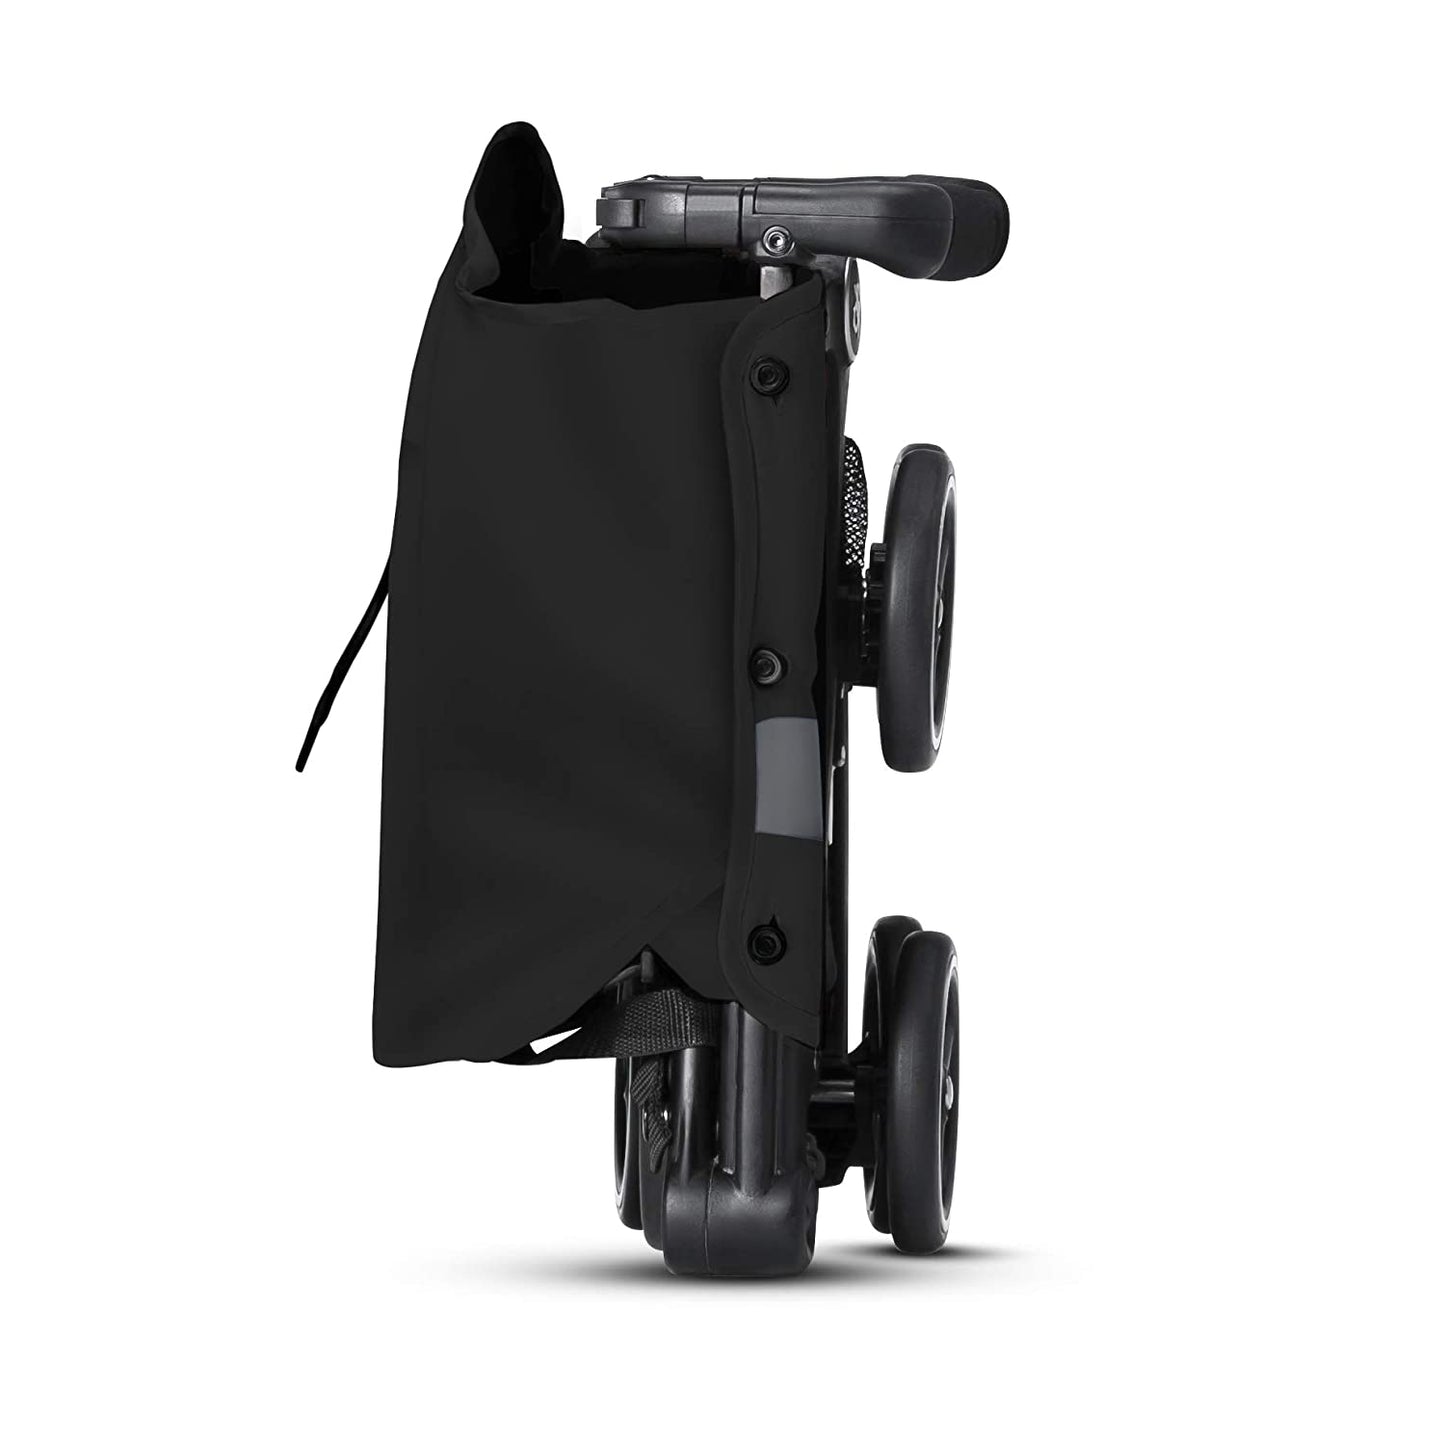 An ultra-compact lightweight travel stroller which has been folded down to a small size.